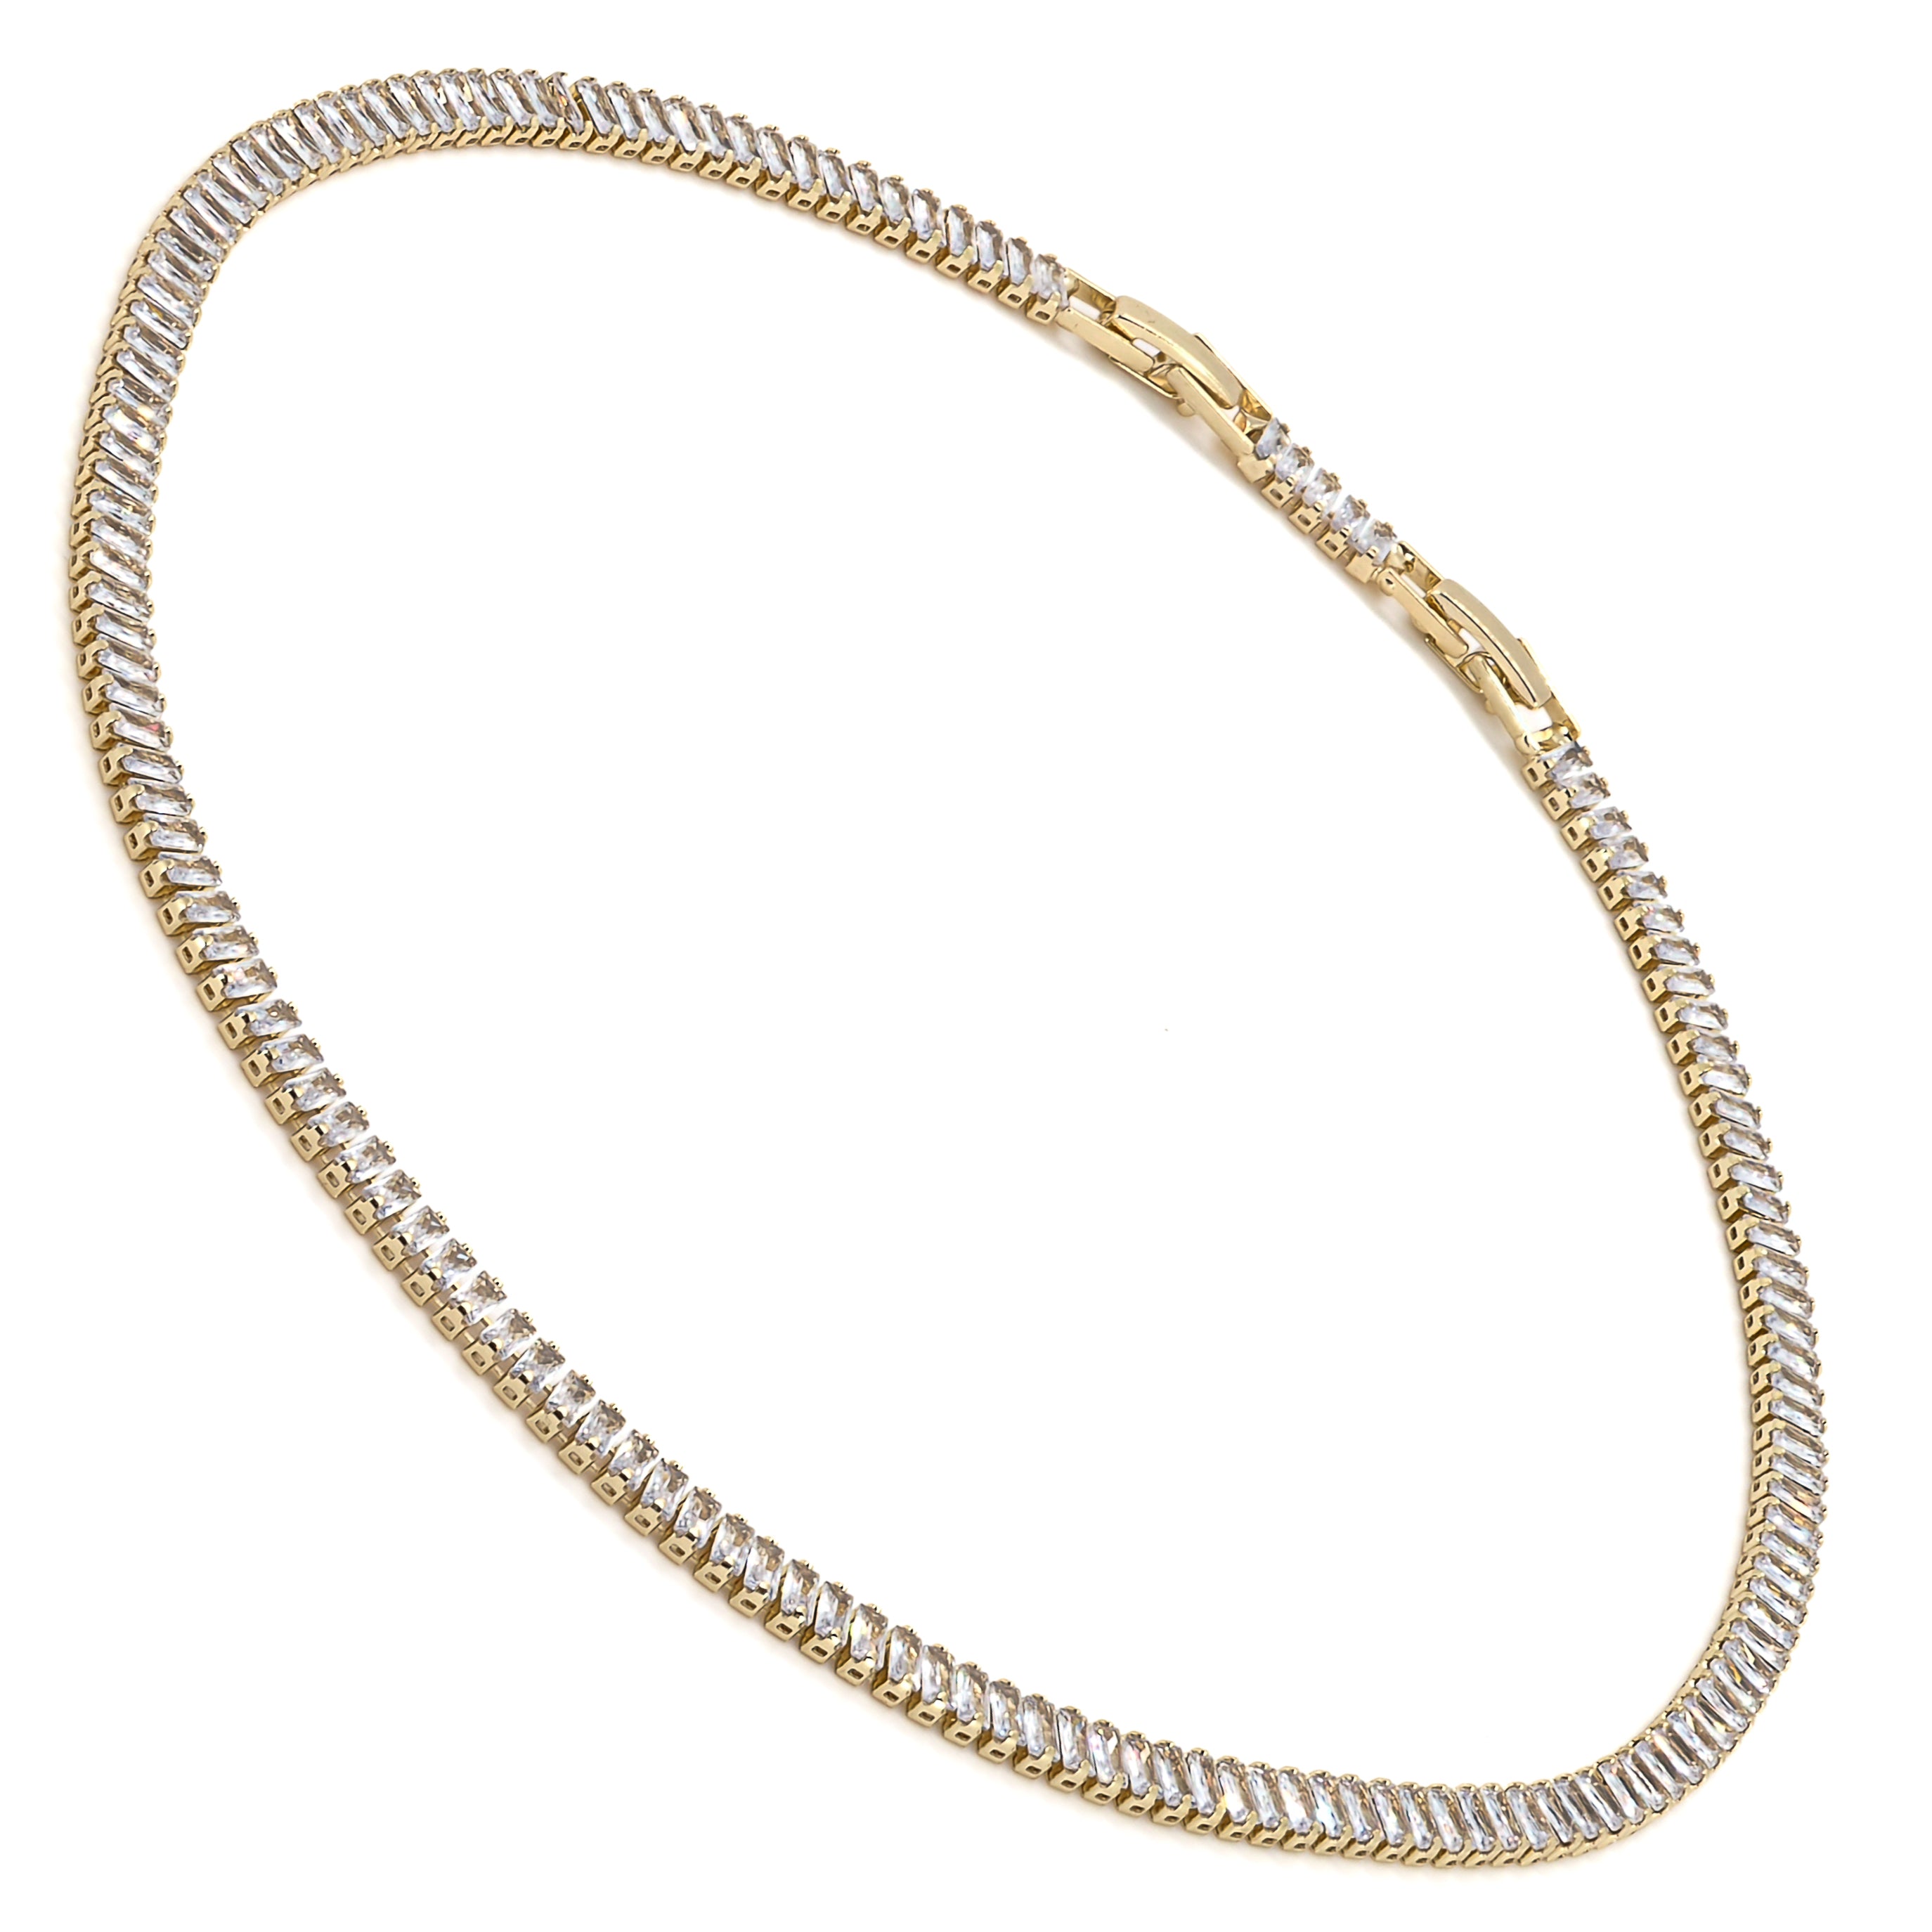 Baguette Diamond Gold Choker Necklace in gold-plated brass, adding a touch of glamour to your ensemble.